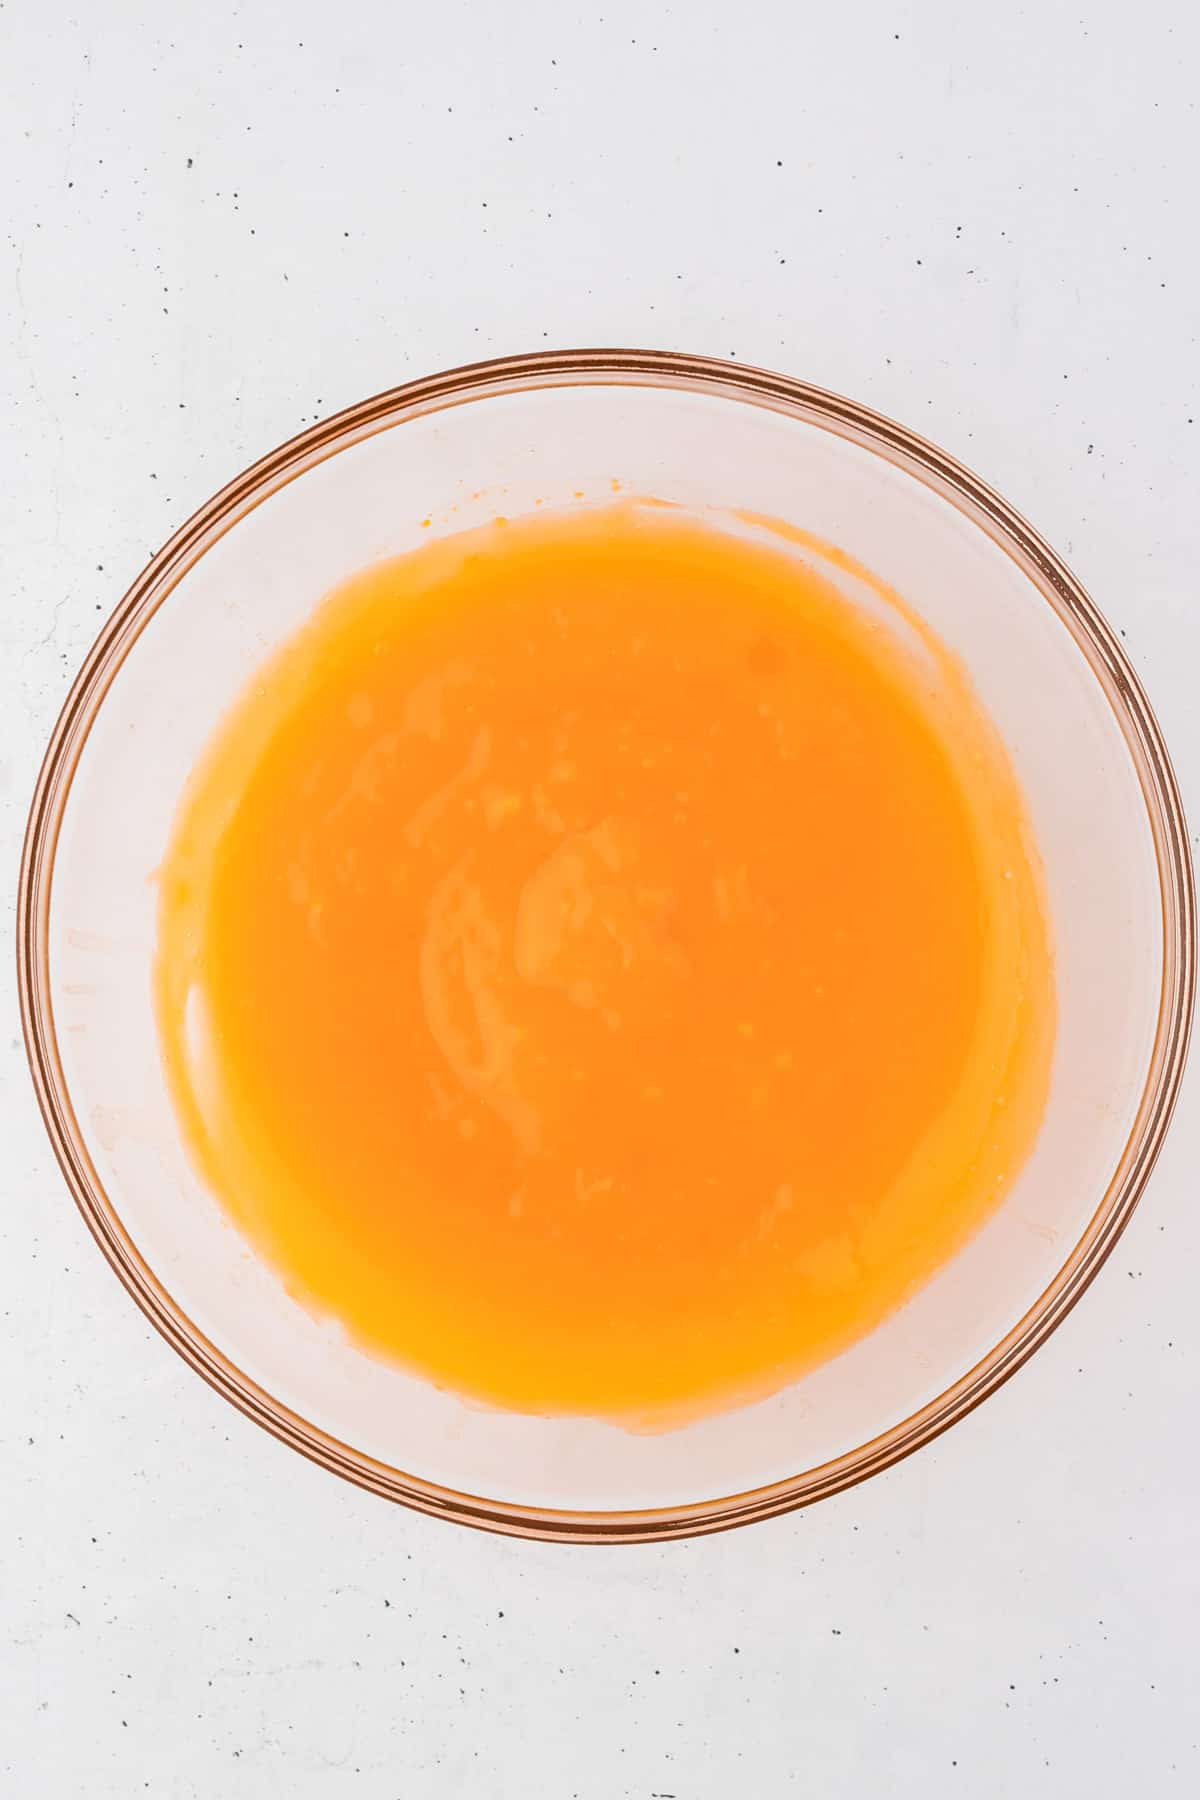 orange jello mix combined with water in a glass bowl